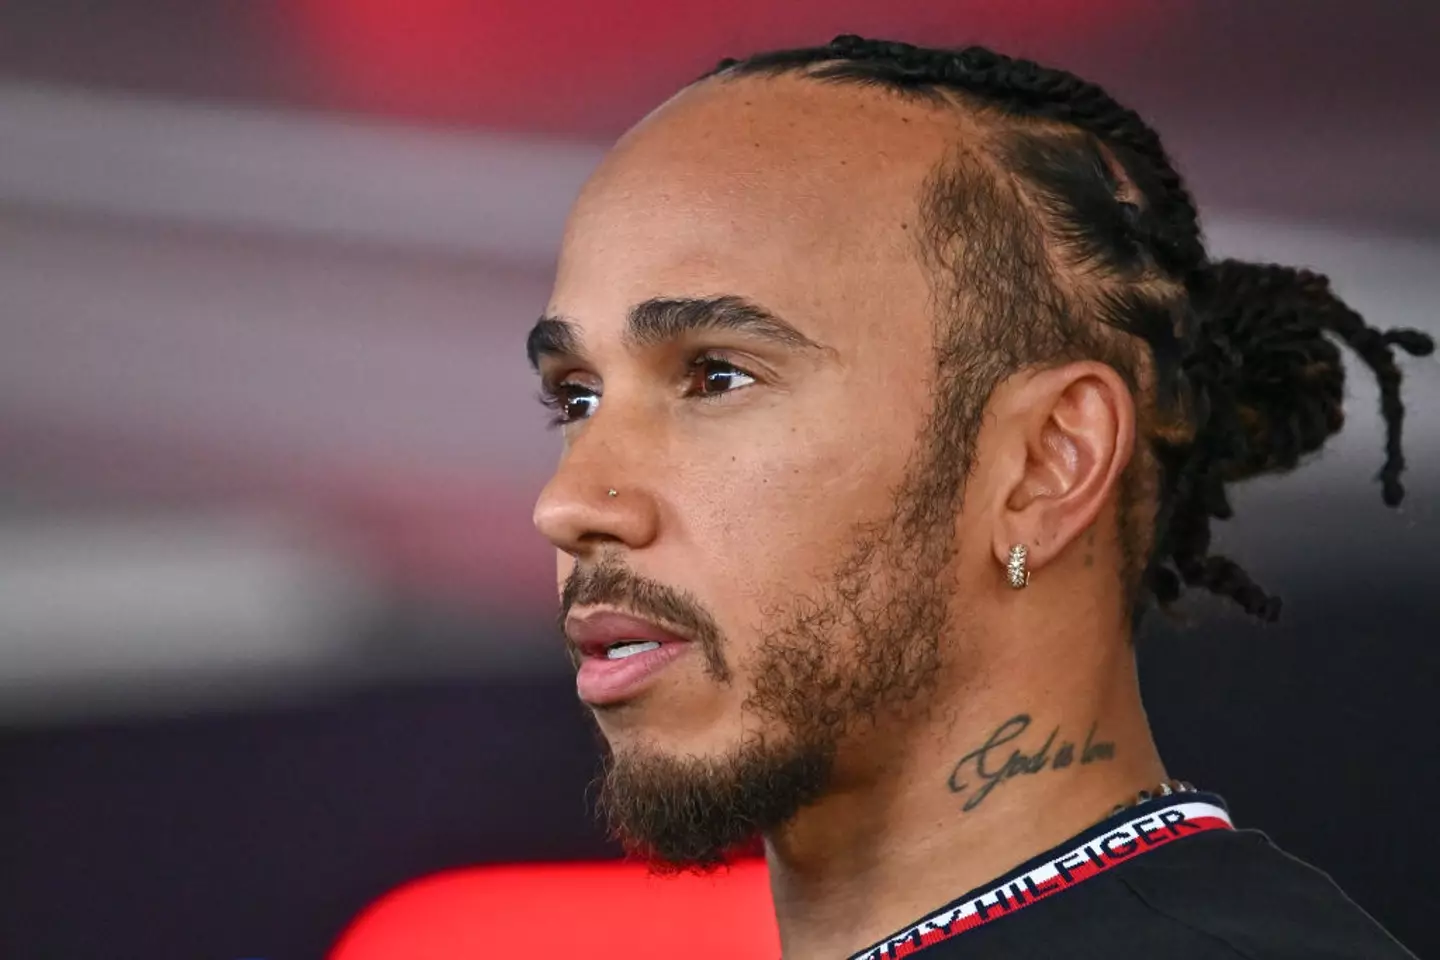 Lewis Hamilton refused to sign a fan's helmet after finishing third in the Spanish GP. (Image: Getty)